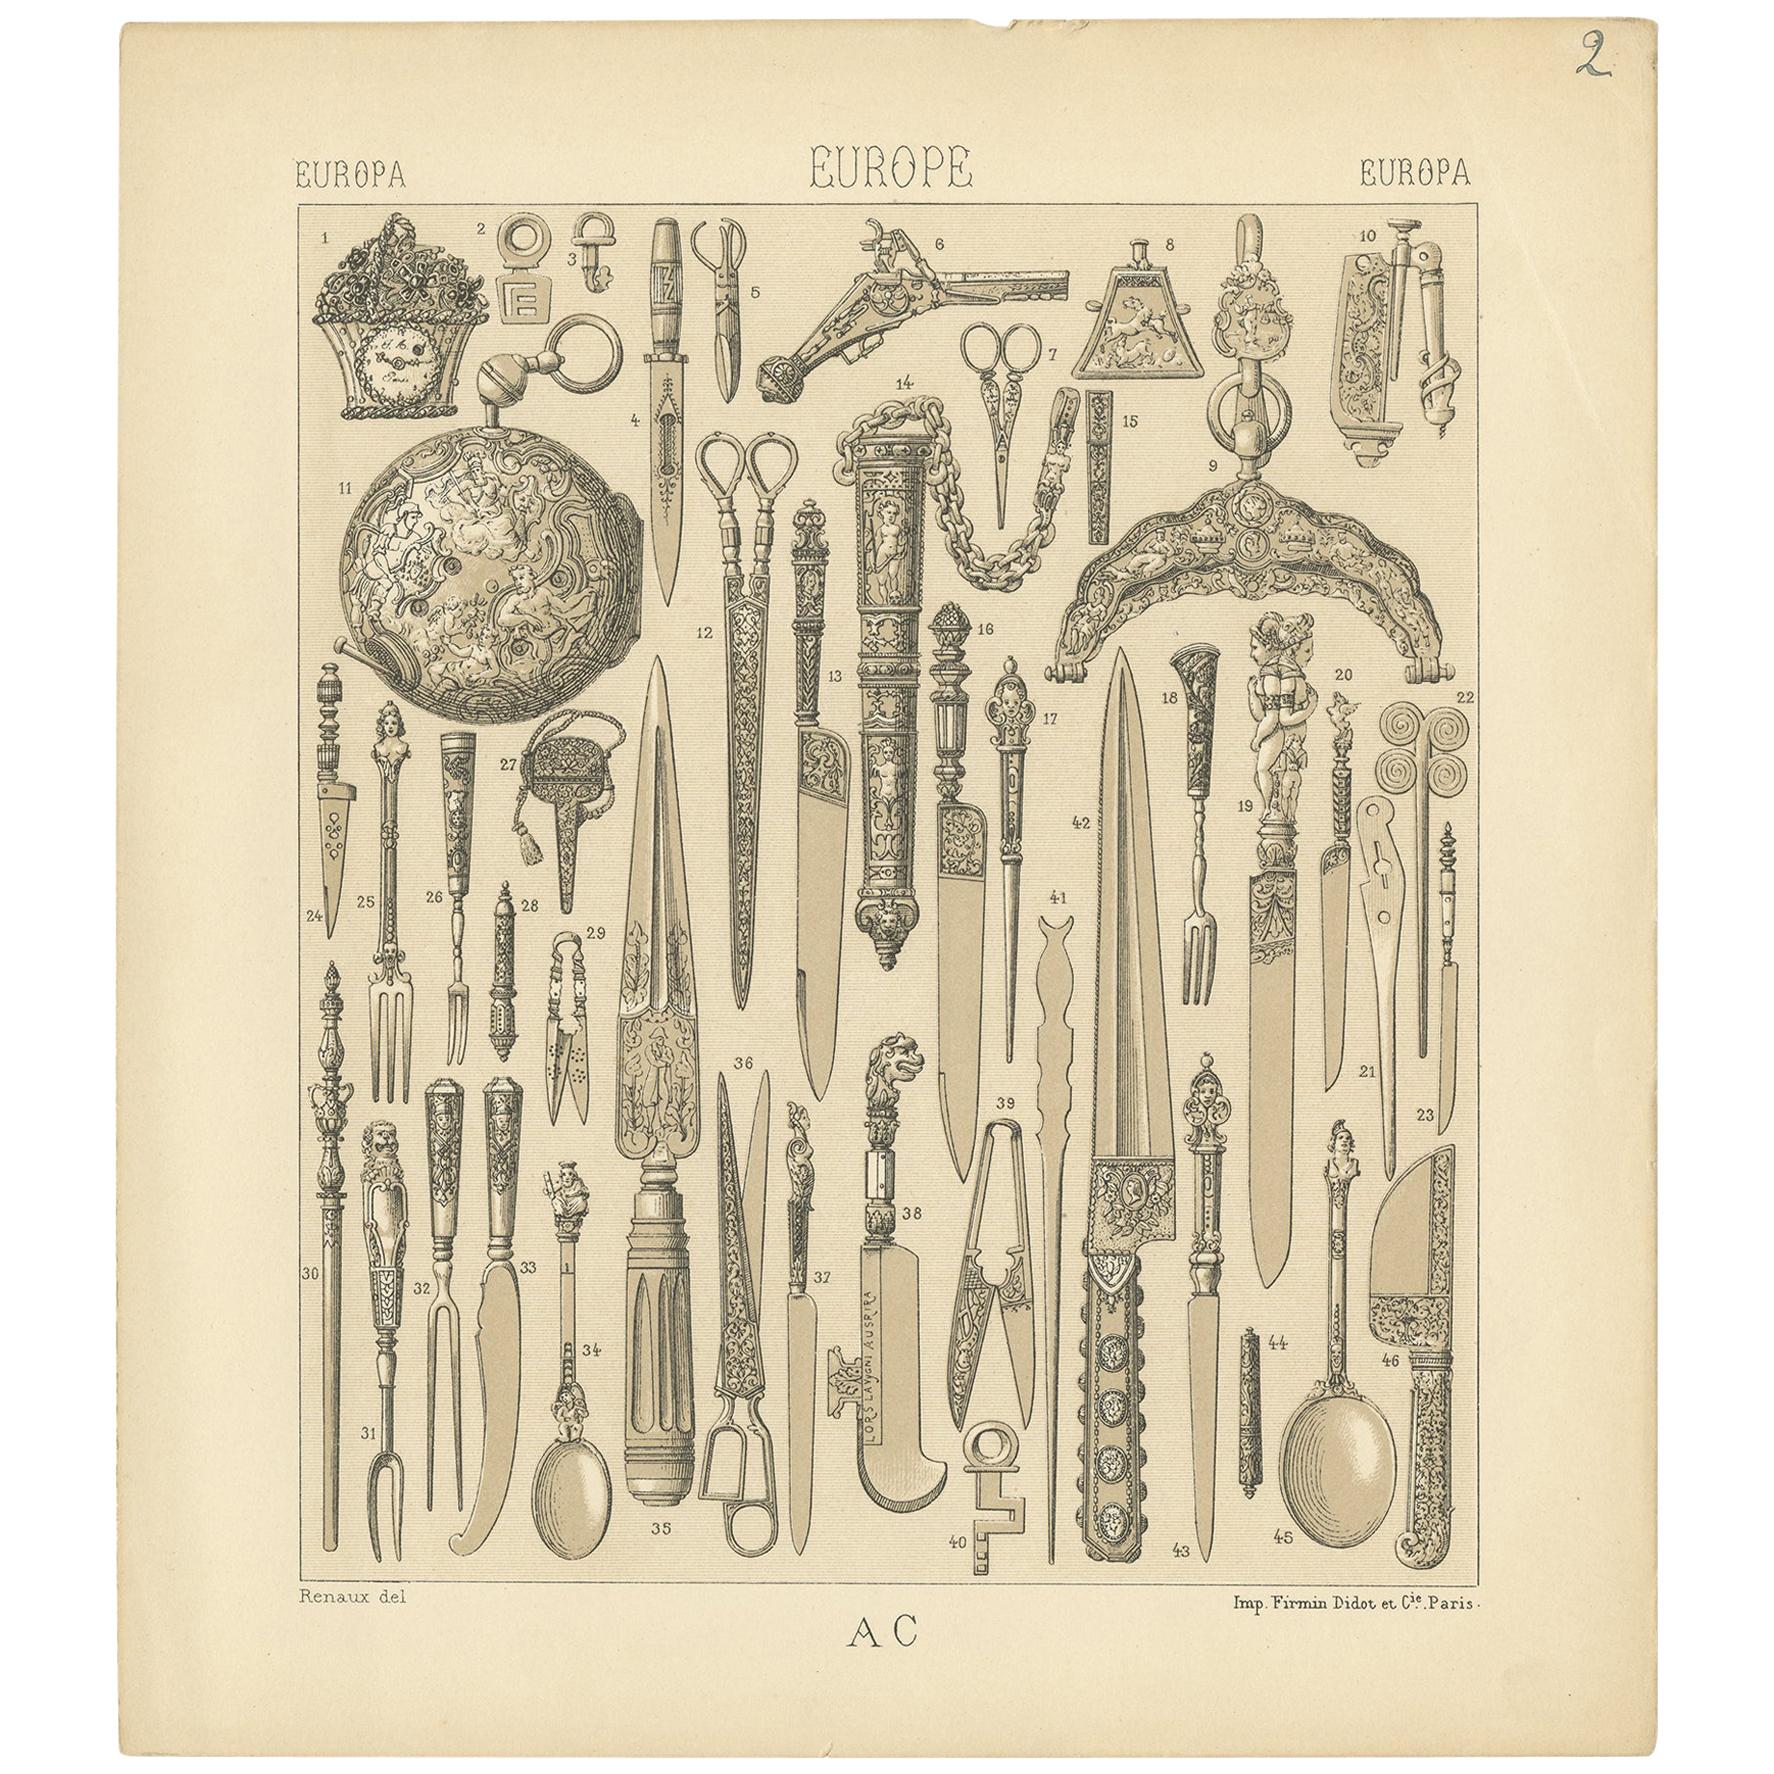 Pl. 2 Antique Print of European Weapons and Jewelry Objects, Racinet, circa 1880